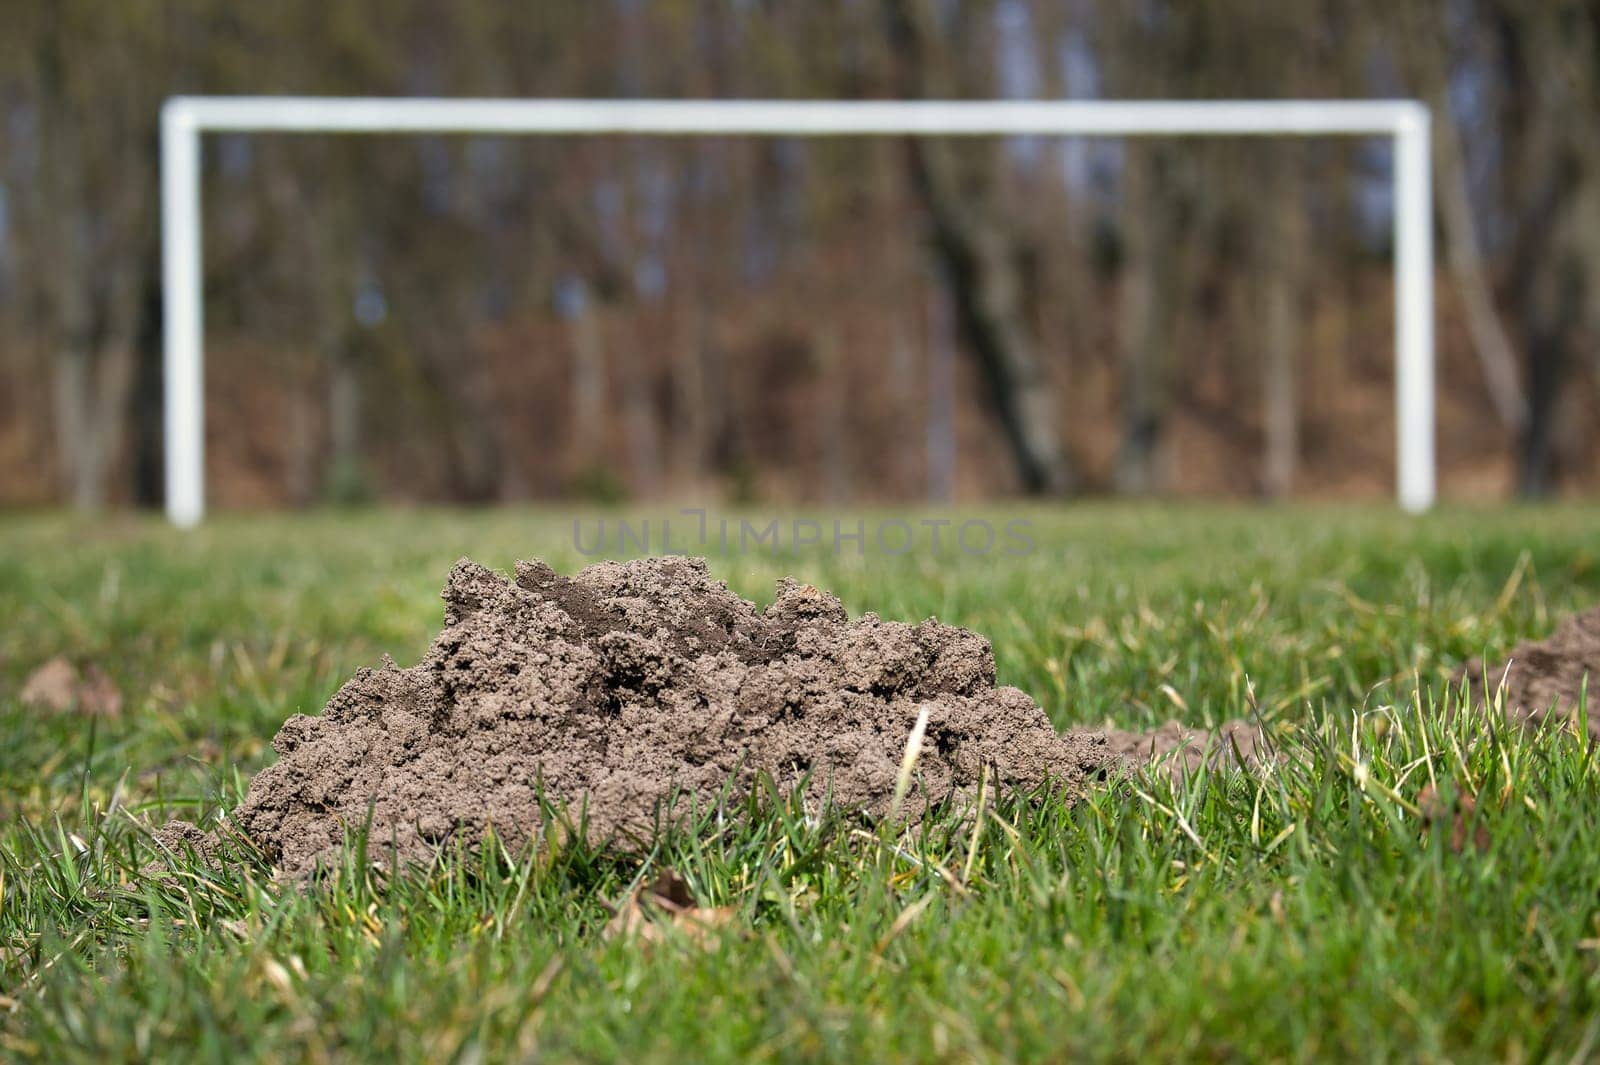 Soccer field with a goalpost in the background and a large mole hole situated in the foreground